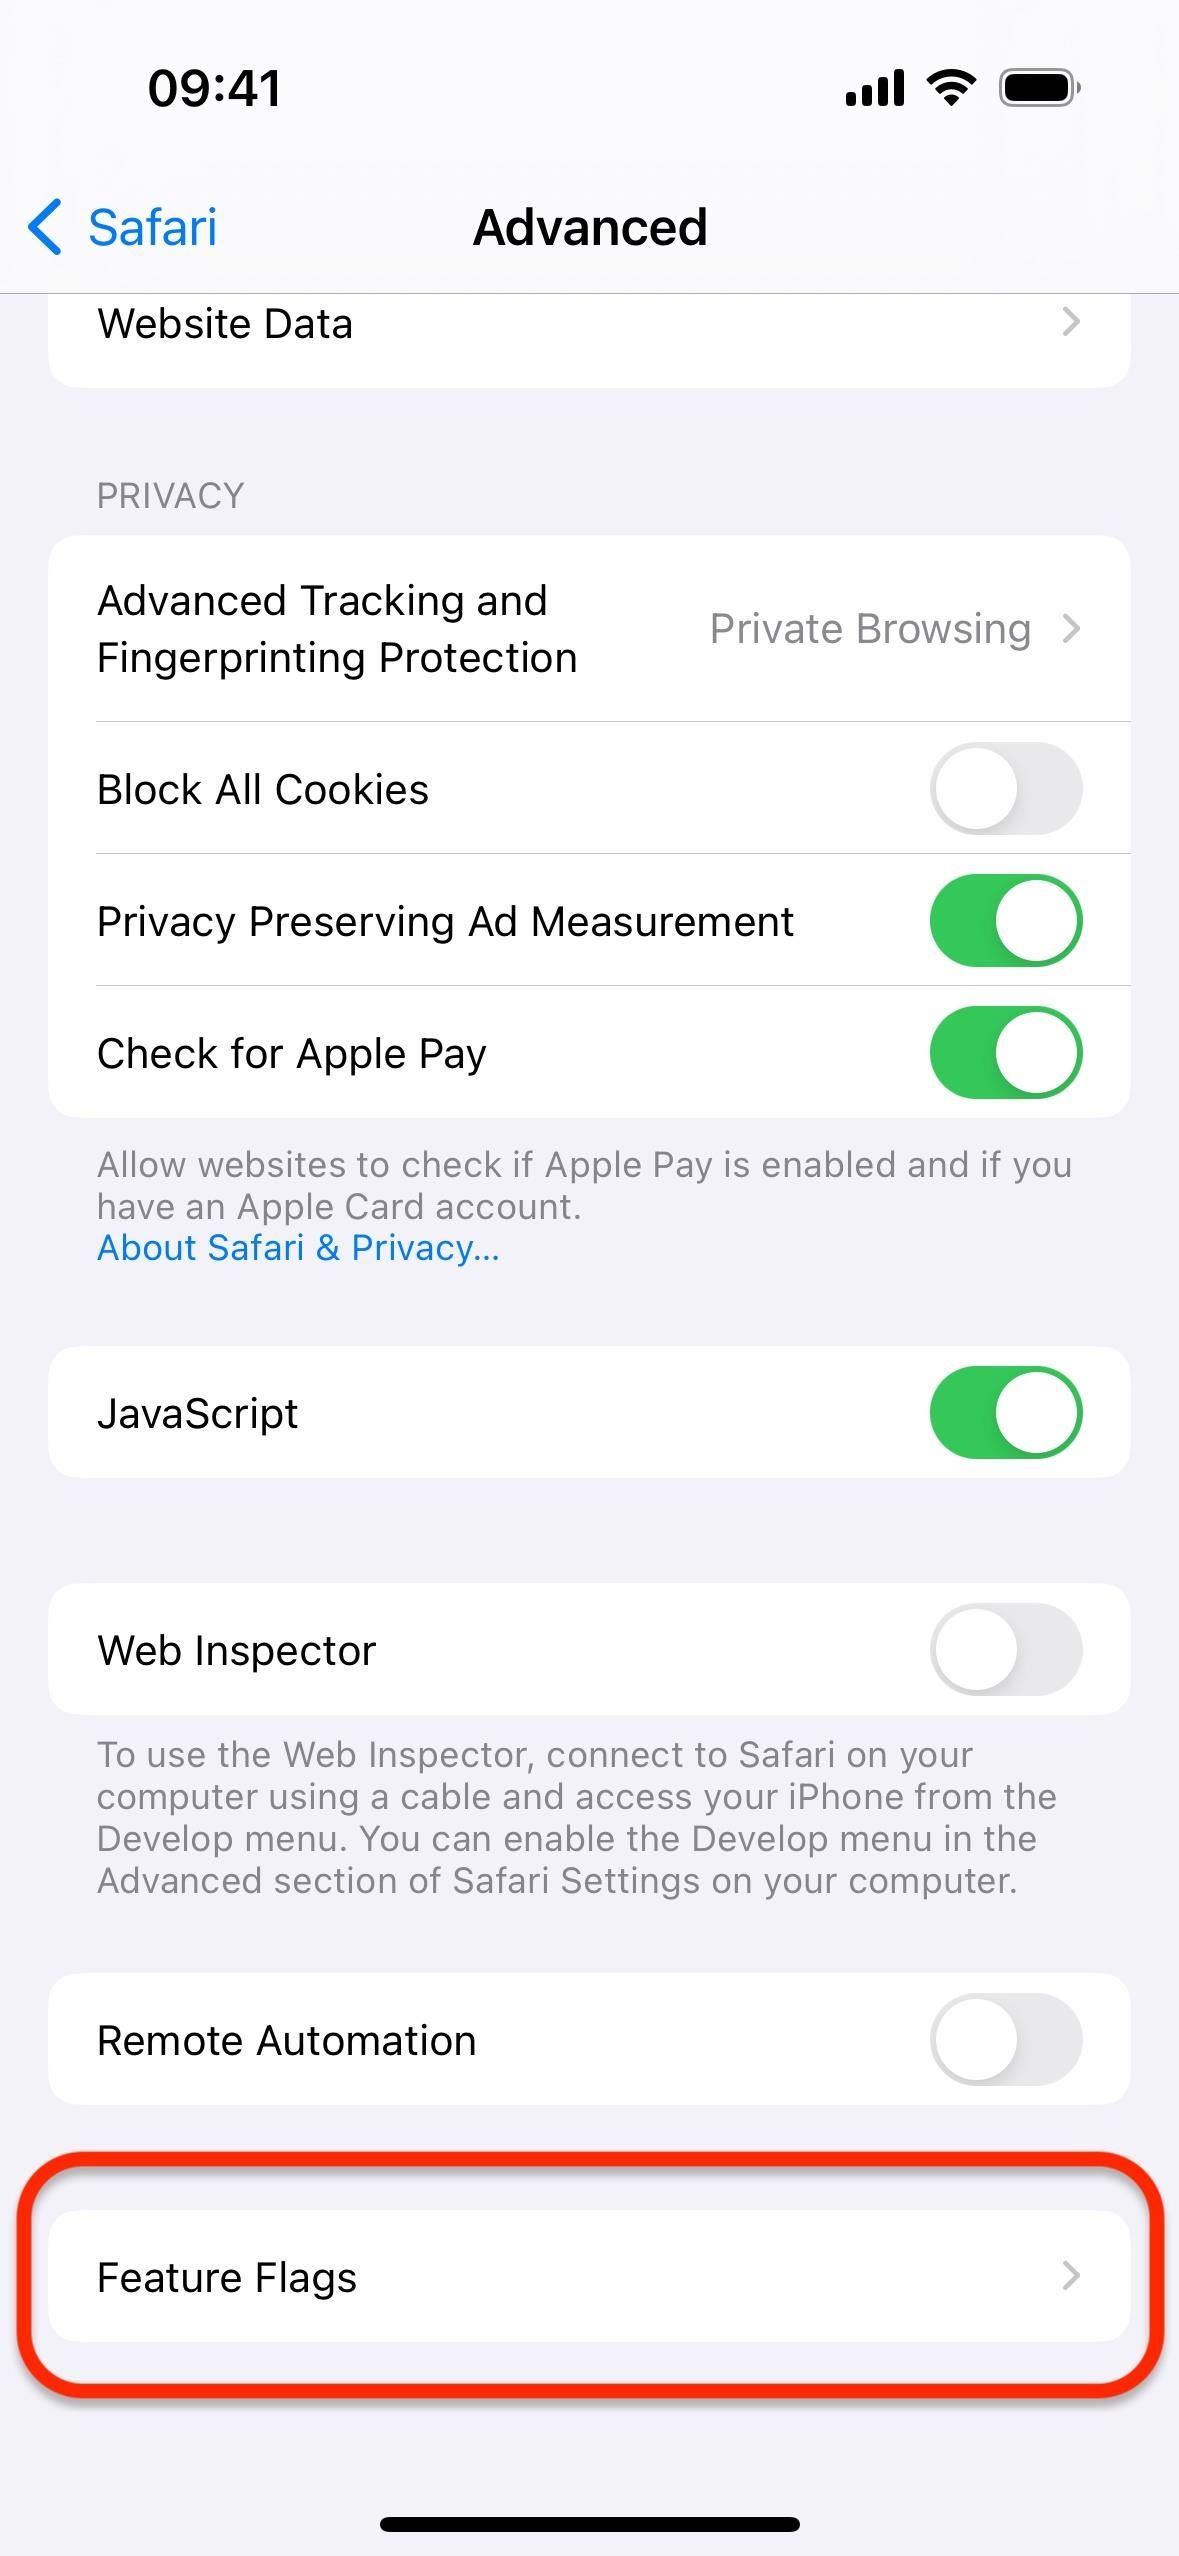 Safari's Massive Upgrade Comes with Over 18 New Features for iPhone, iPad, and Mac